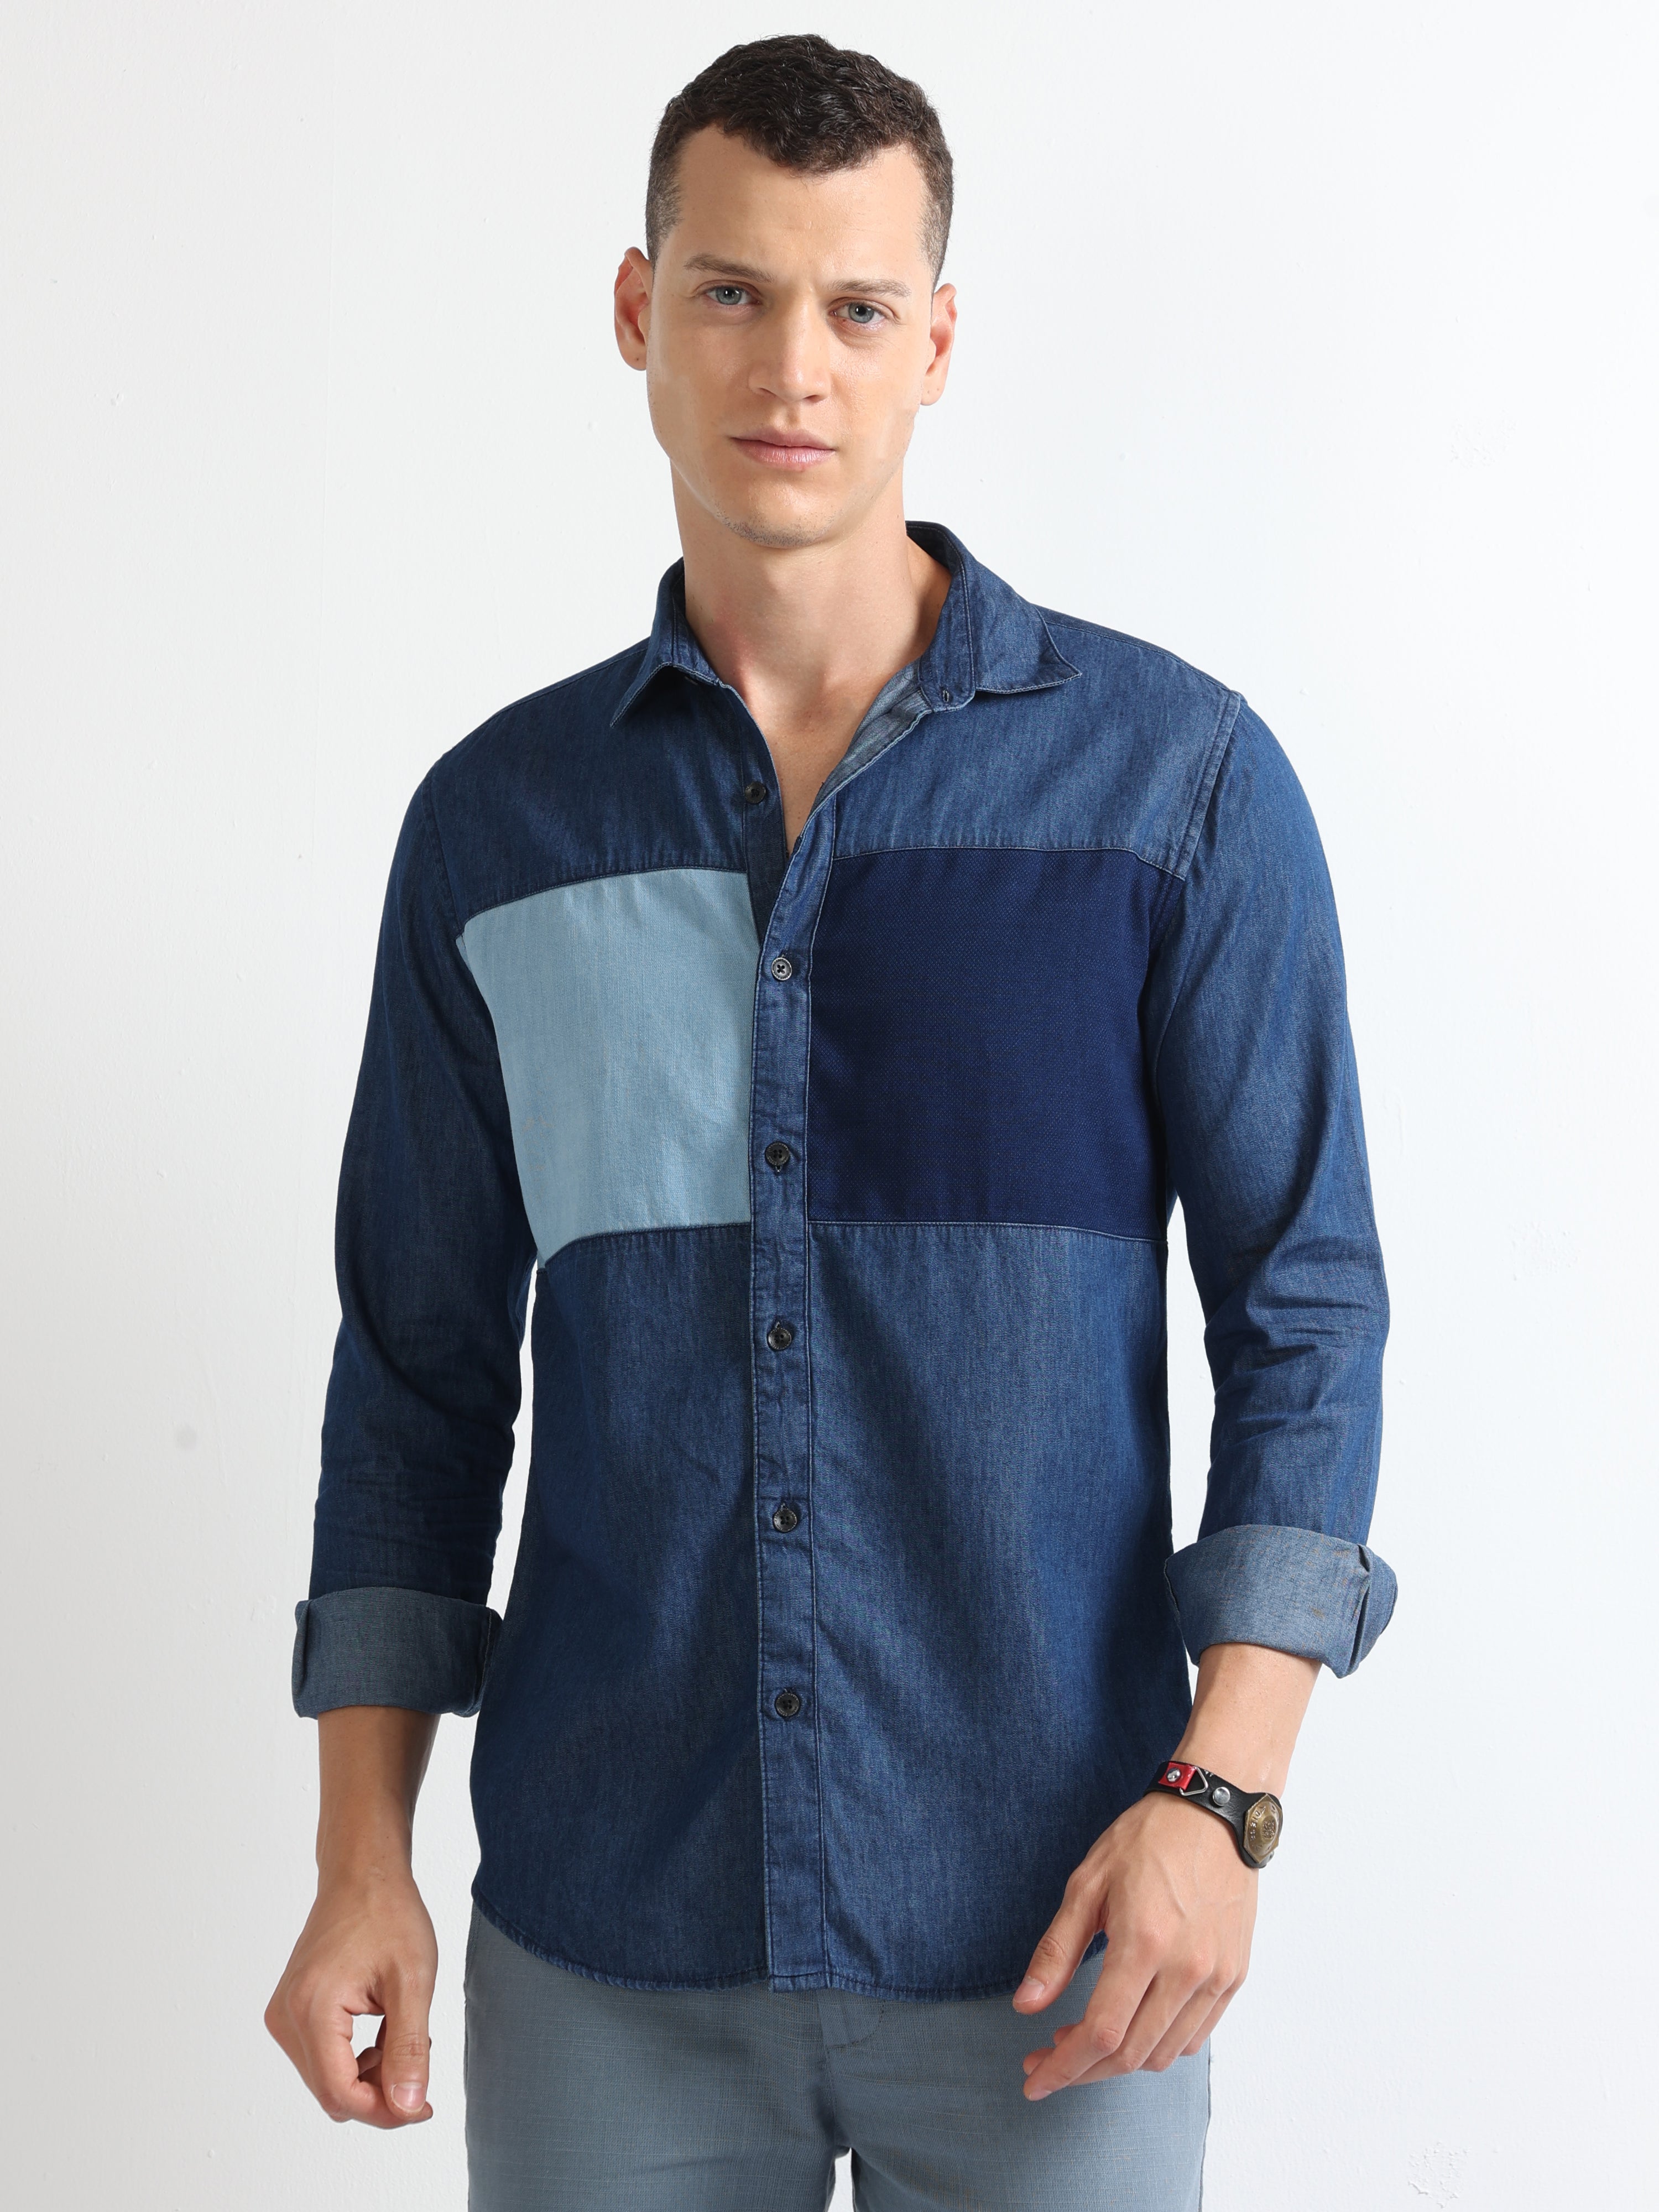 Buy Grace Long Sleeve Denim Woven Shirt (B&T) Men's Shirts from AKOO. Find  AKOO fashion & more at DrJays.com